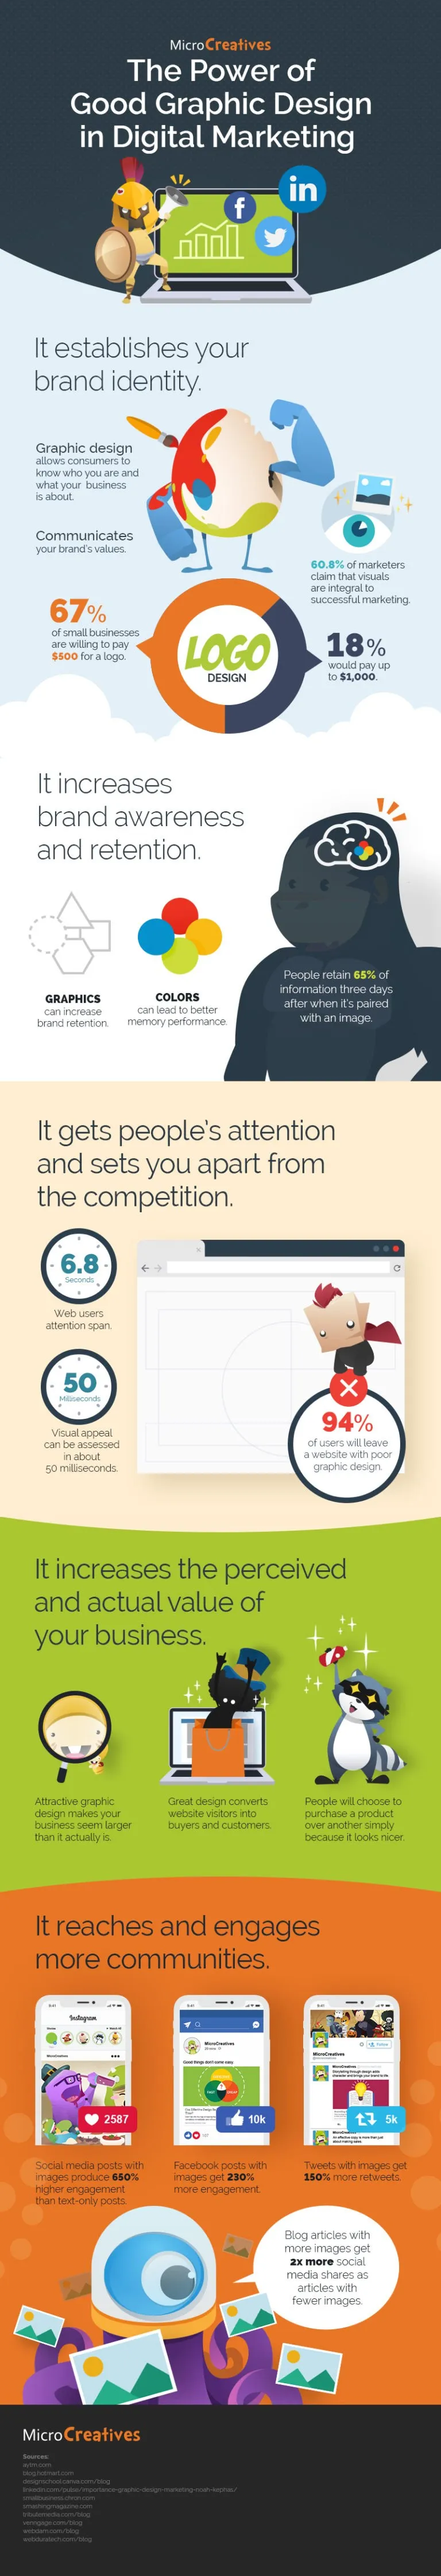 The Power Of Good Graphic Design In Digital Marketing - #infographic